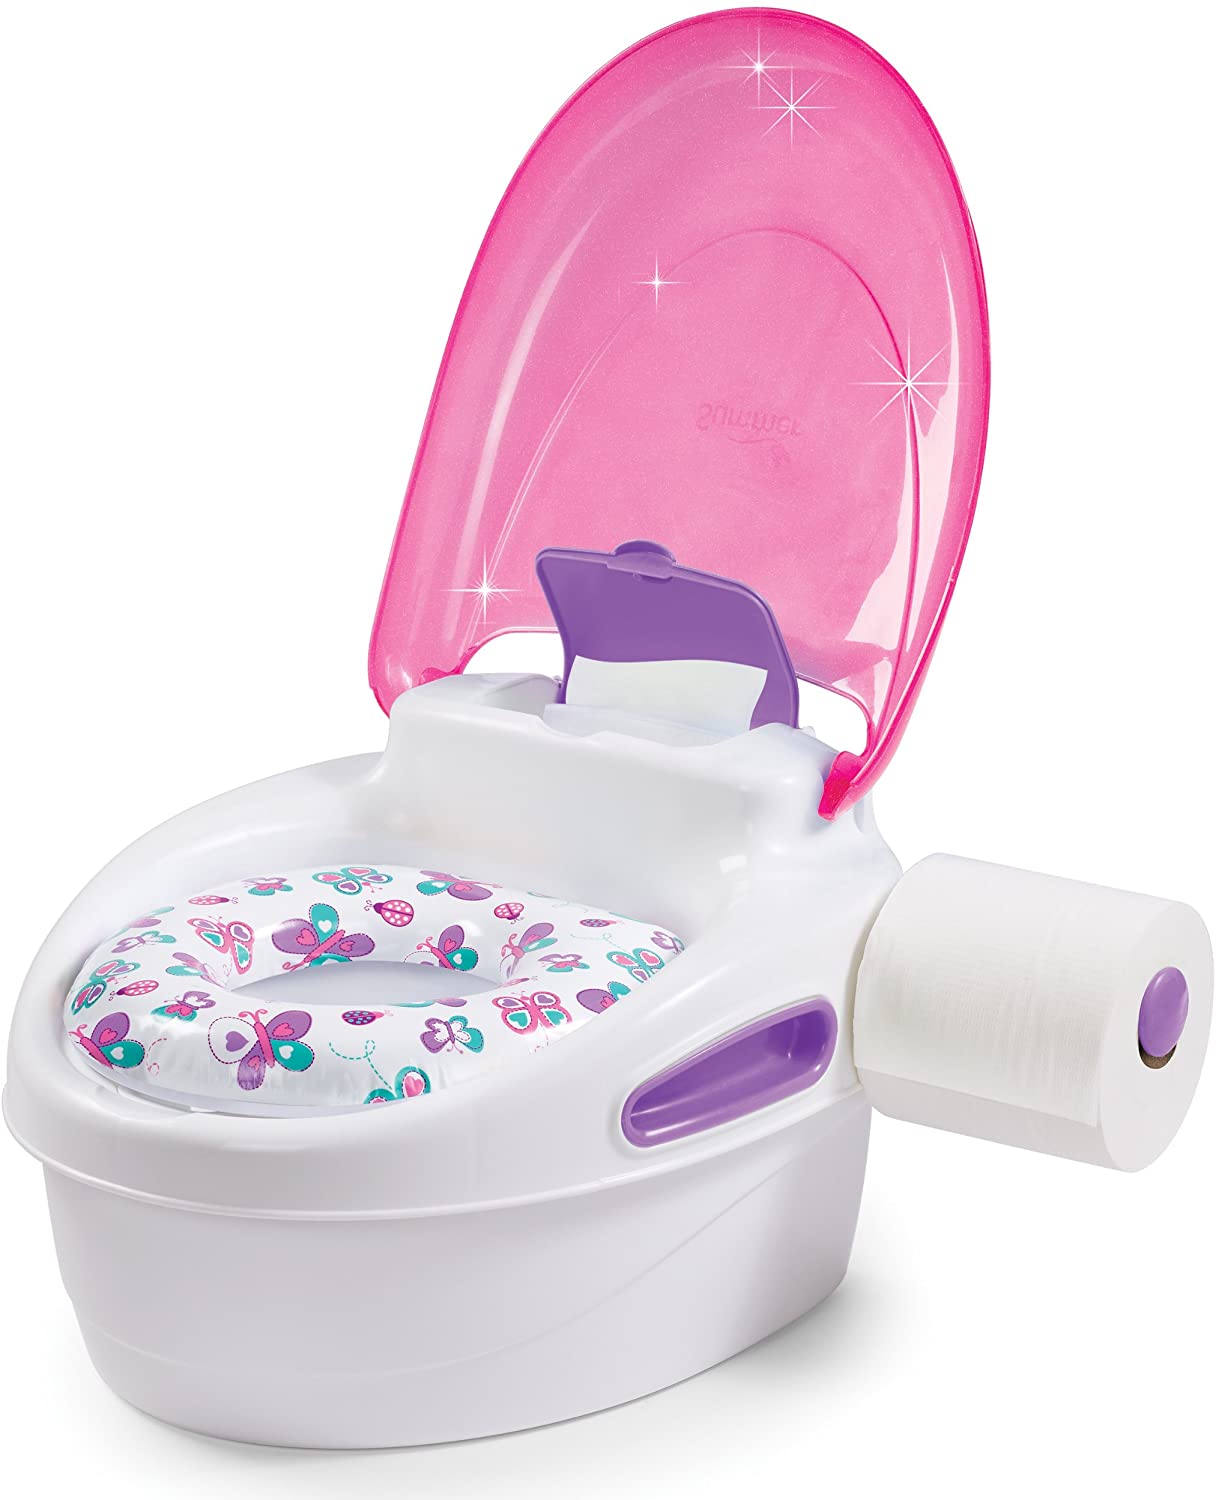 Kids Stool Pink Step Ideal Gift Great for Potty Training 